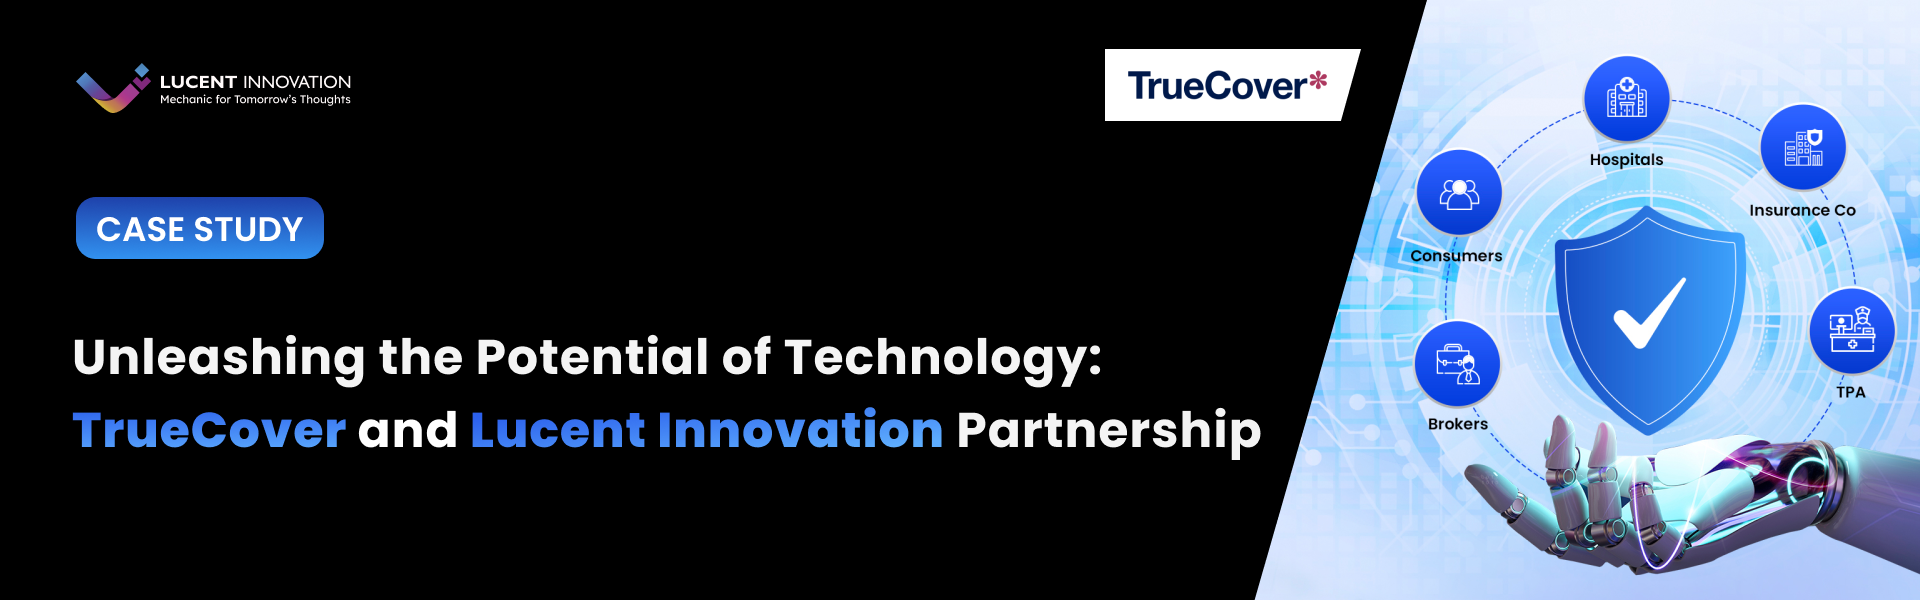 Unleashing the Potential of Technology: The TrueCover and Lucent Partnership